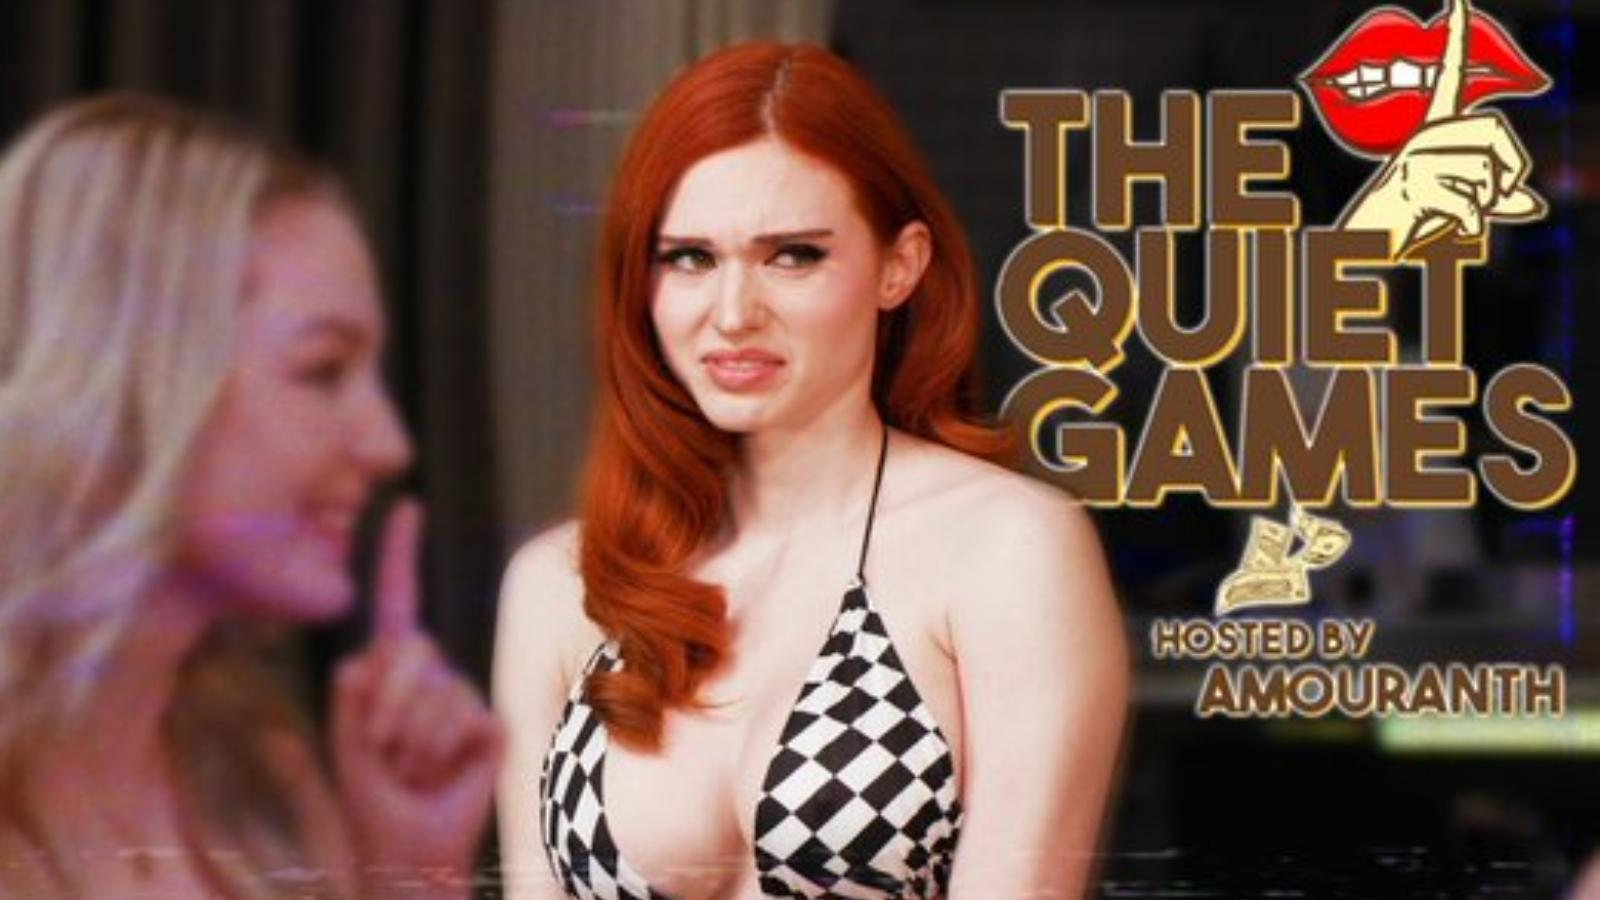 amouranth on onlyfans tv quiet games show